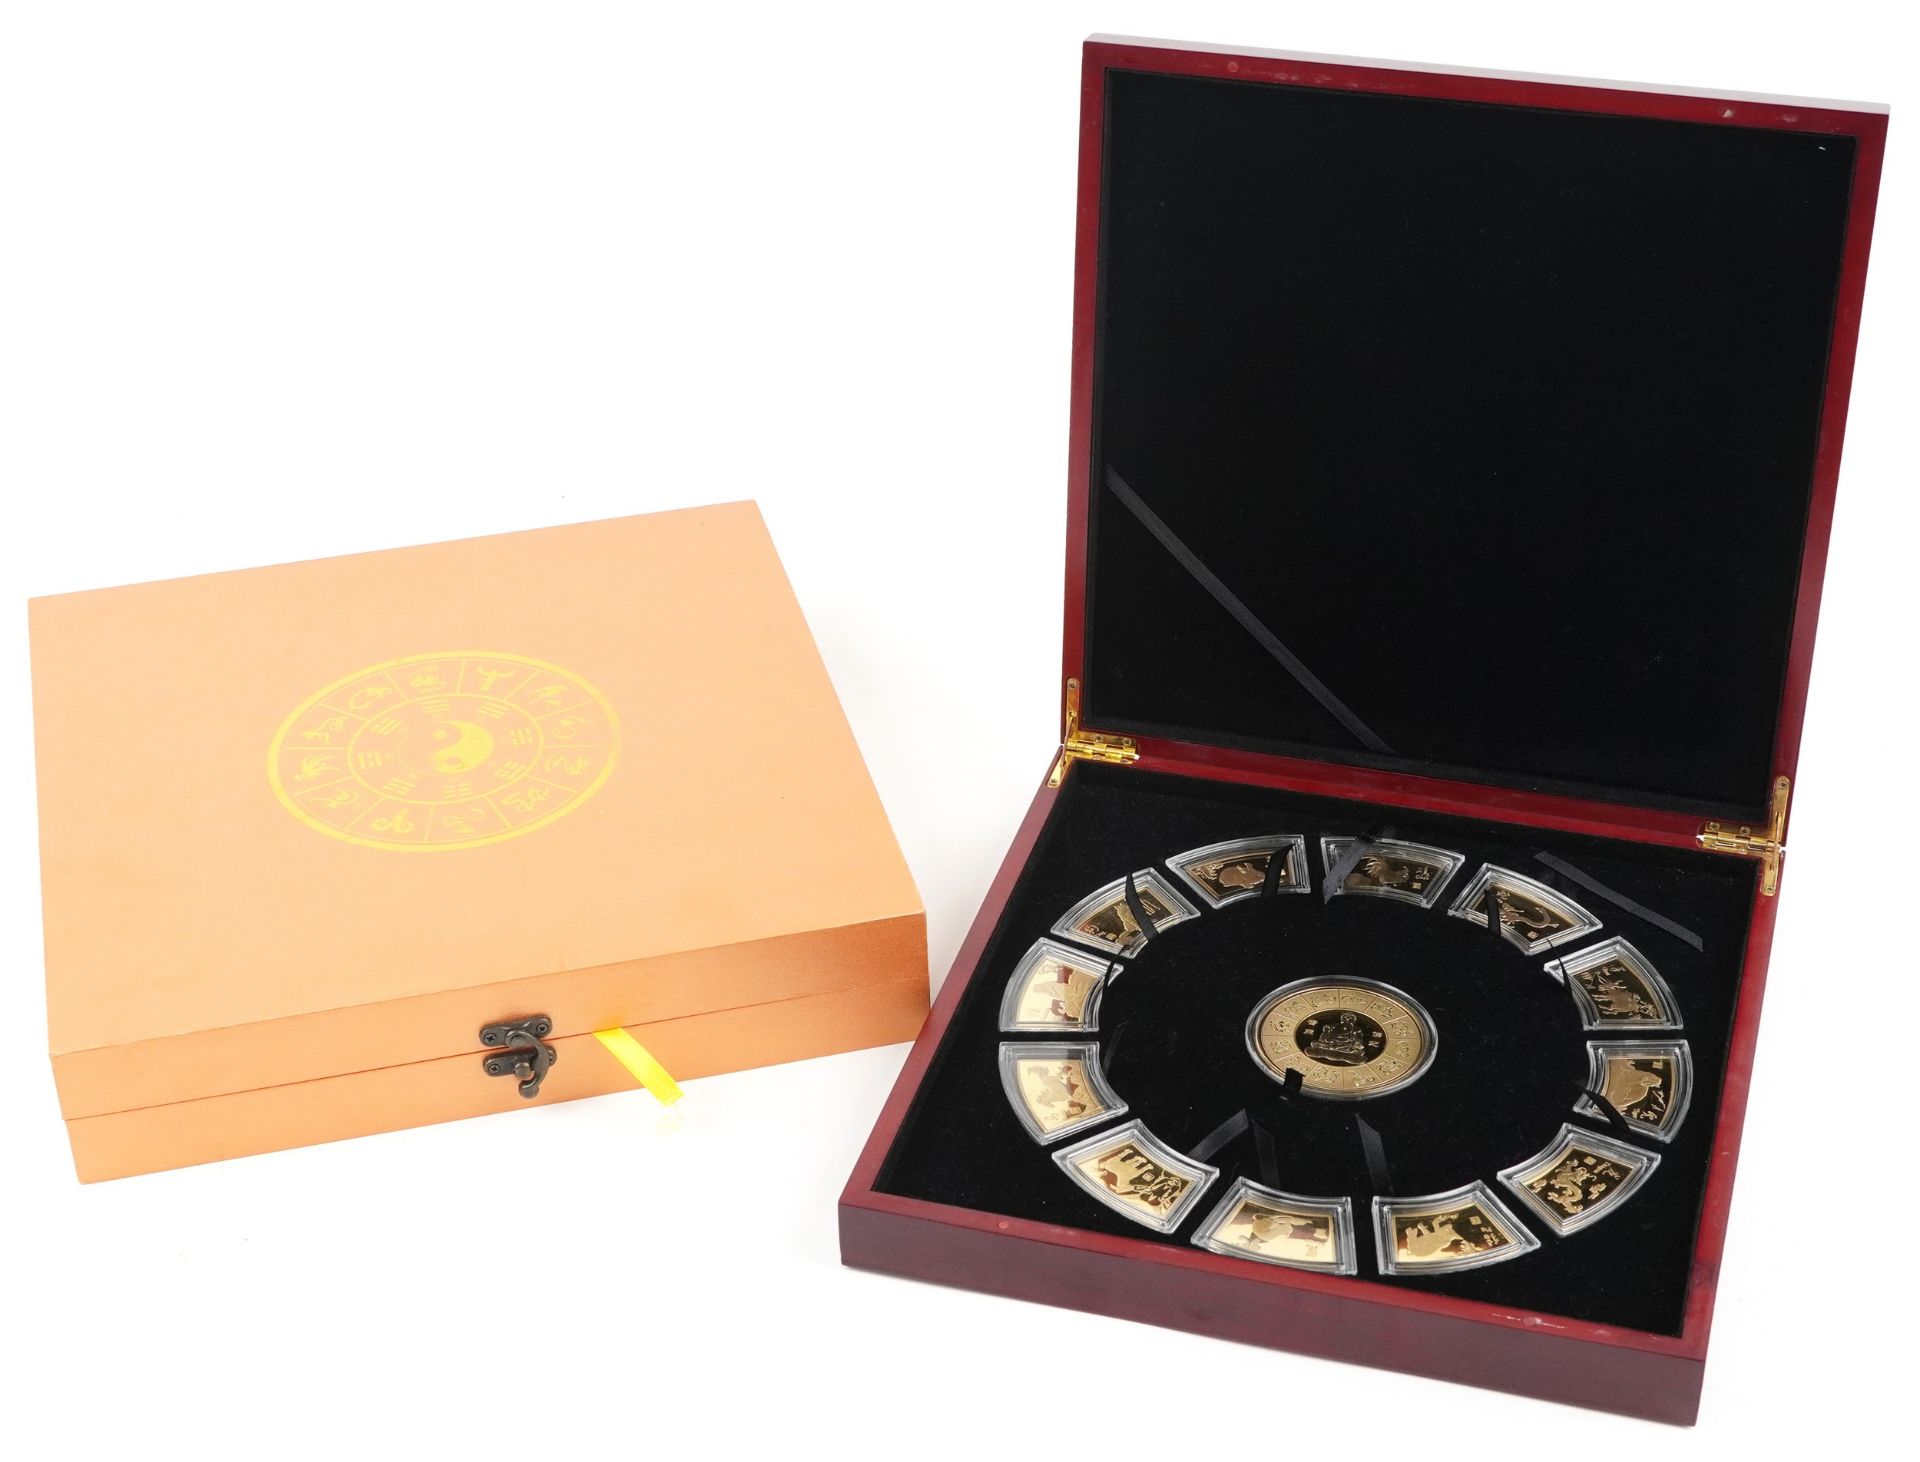 Set of Chinese zodiac ingots housed in a fitted box with protective box, 32cm x 32cm